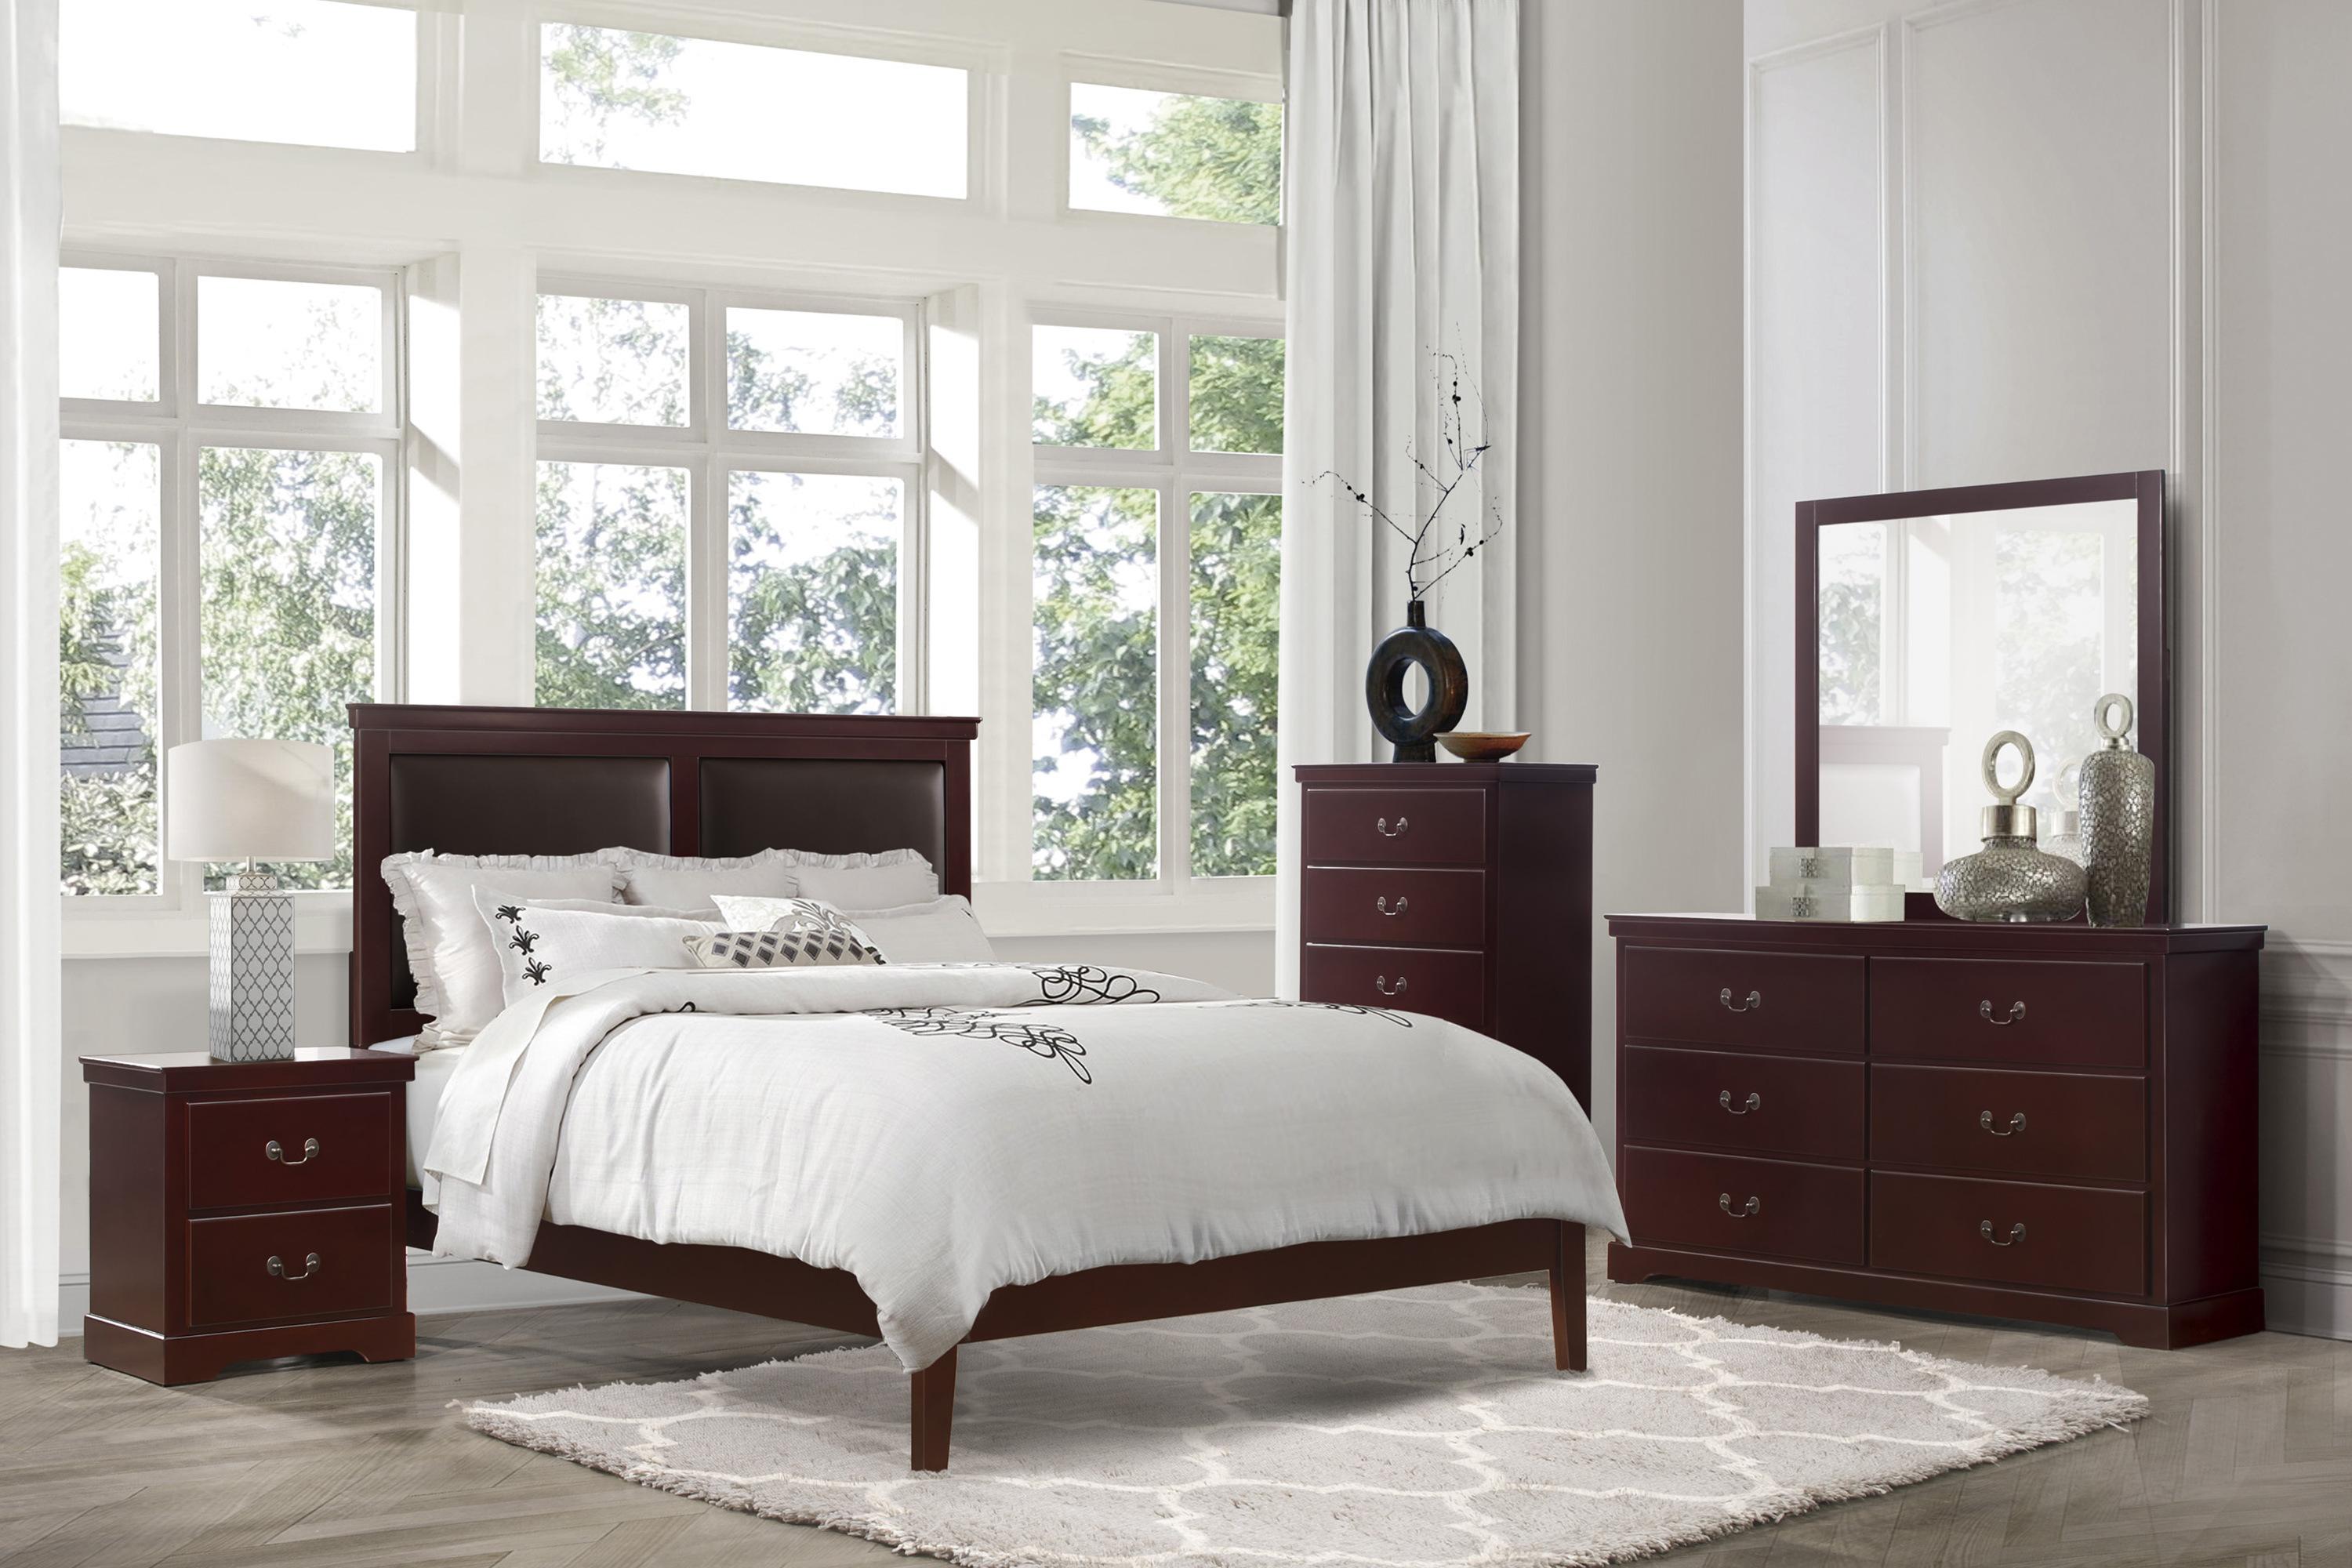 Modern Bedroom Set 1519CH-1-5PC Seabright 1519CH-1-5PC in Cherry Faux Leather